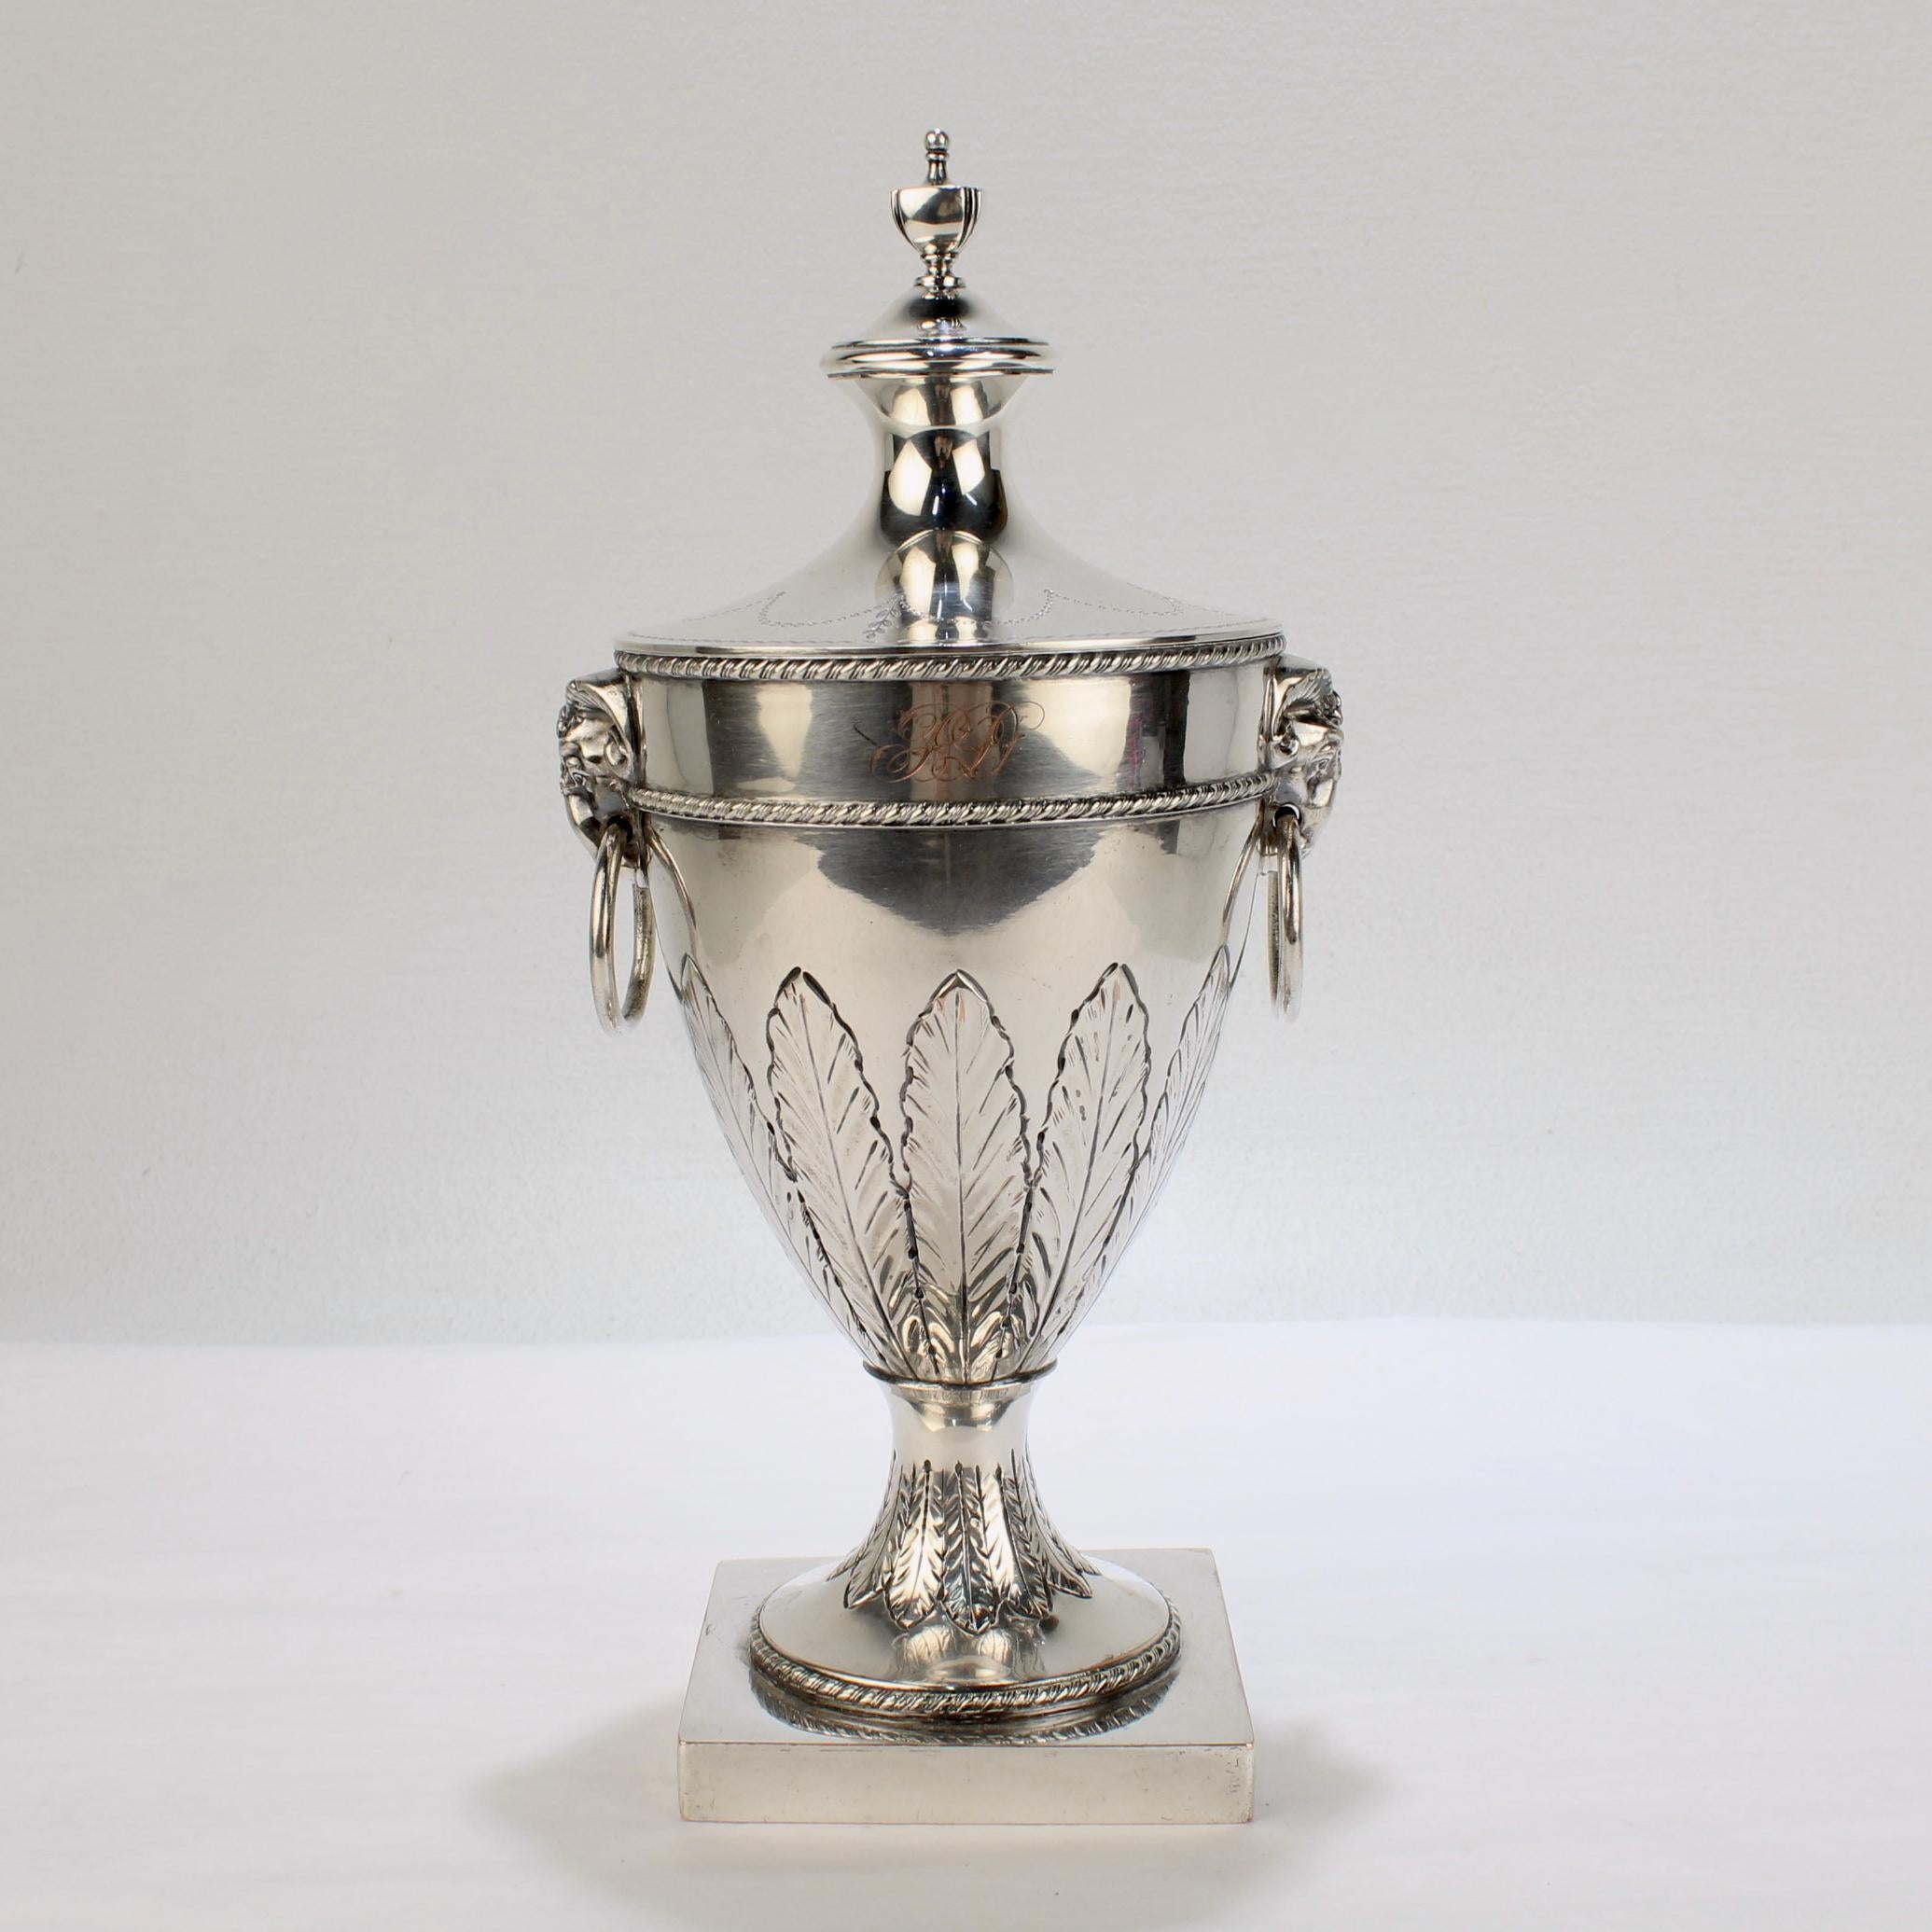 A very fine antique English silver plated vase and cover. 

In the 18th century Neoclassical Sheffield style.

The vase has ram's head and loop handles, etched acanthus leaf design around its circumference, and is supported by a square base. The